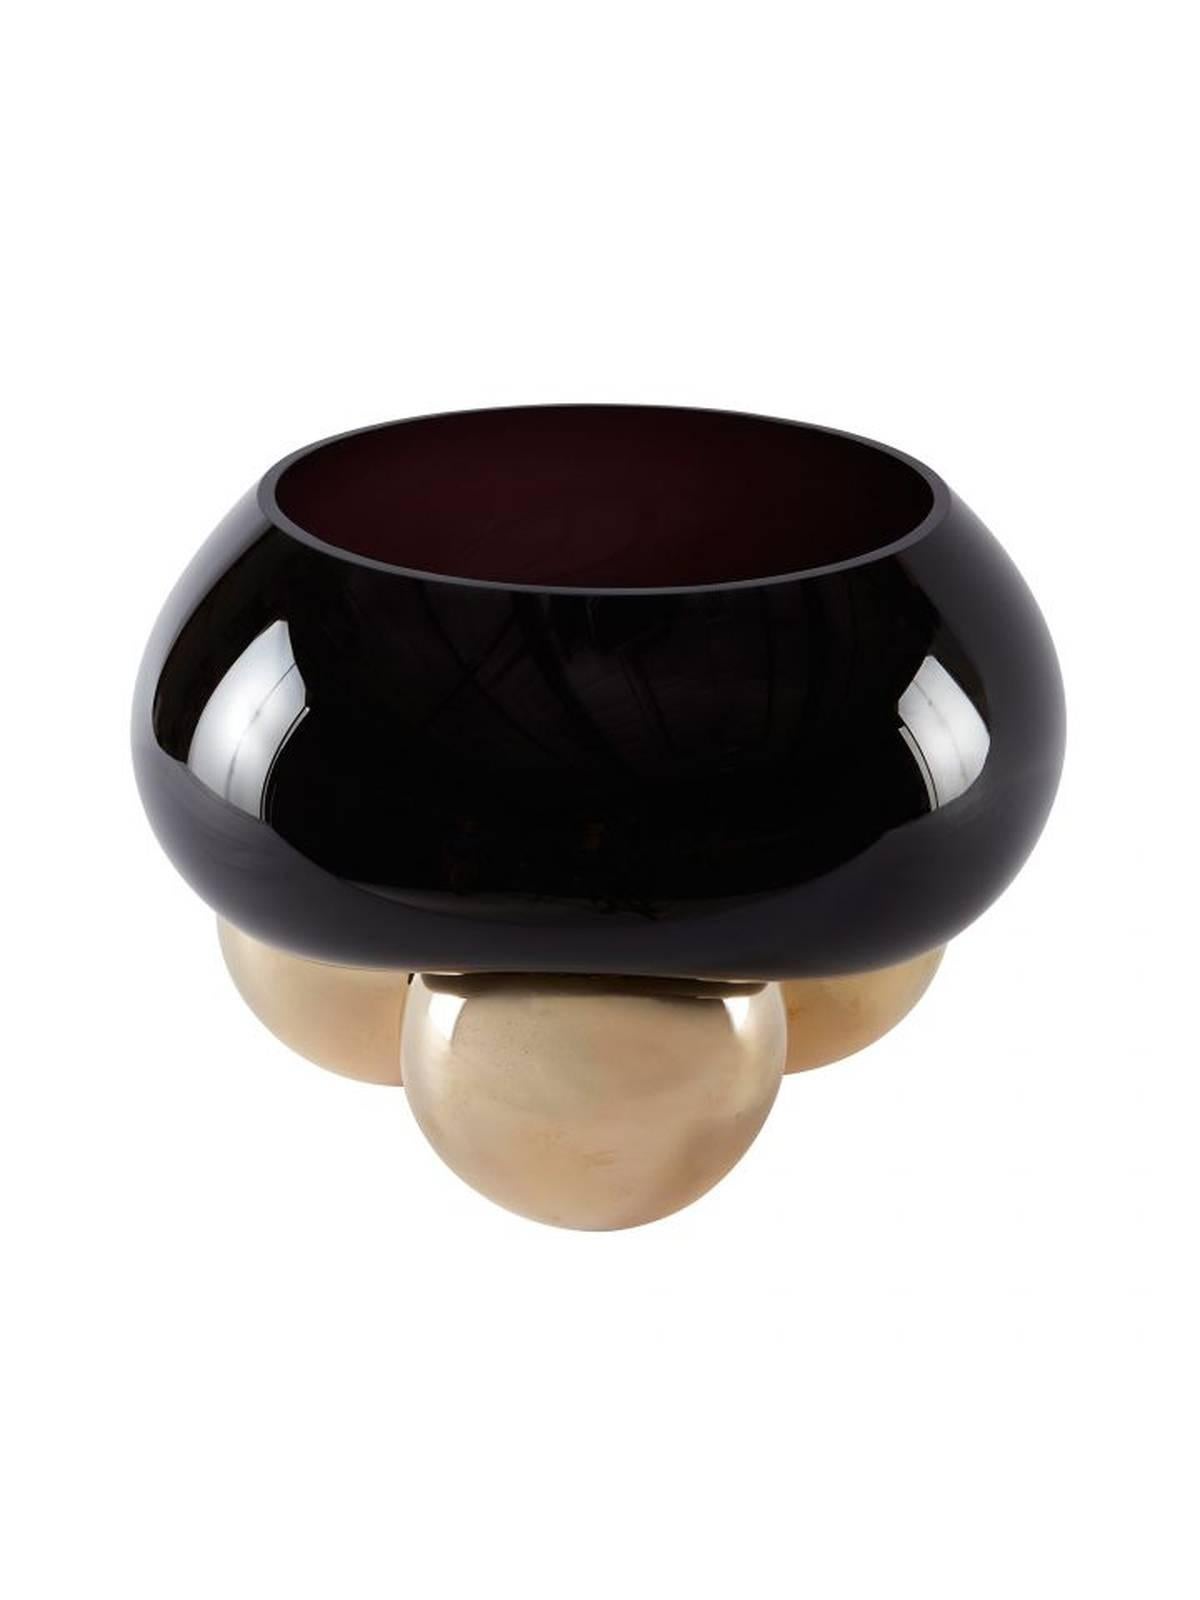 A handblown black glass bowl formed over the shape of three bronzed spheres. Any subtle bubbles are a testament to its handmade origin. Each piece slightly unique. Made in France.